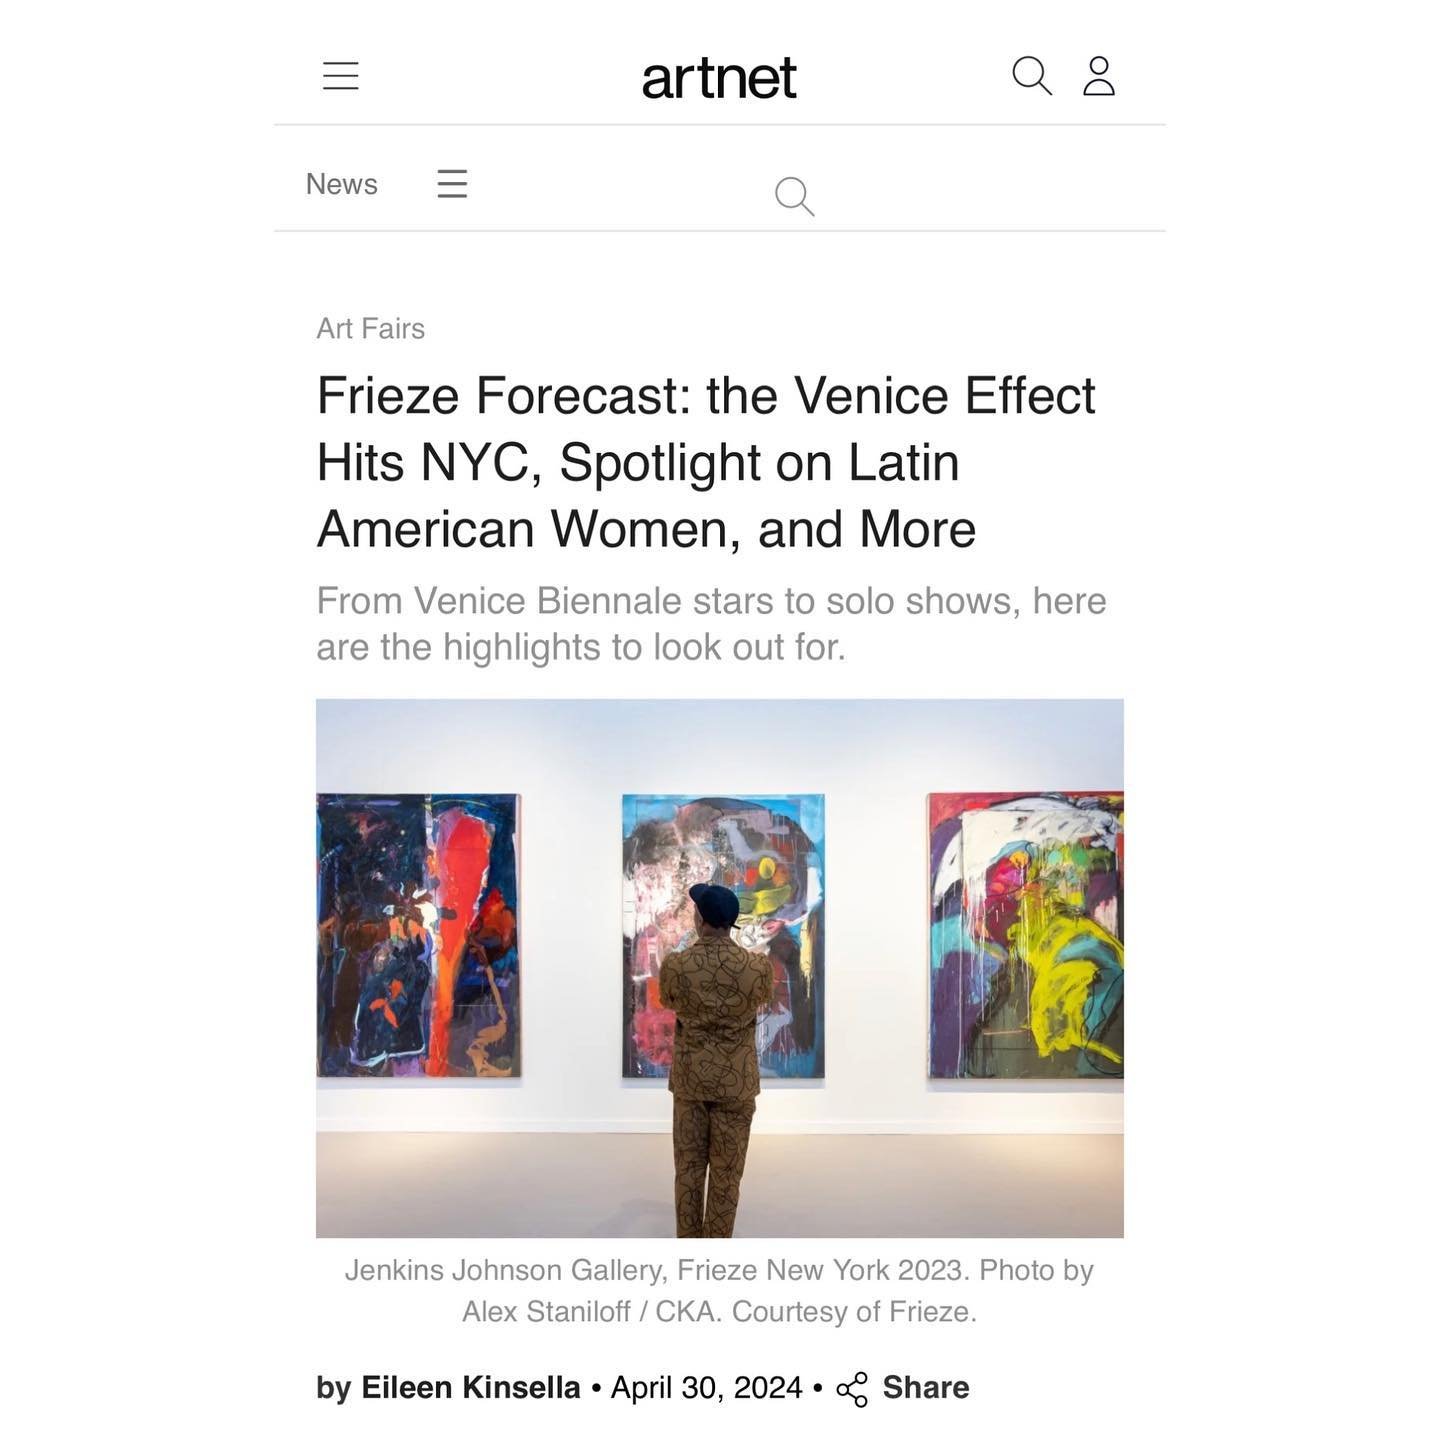 Spring has sprung in New York, and with it, Frieze art fair @friezeofficial! Thanks to @artnet and Eileen Kinsella @ebkinsella for tapping me to comment on this year&rsquo;s iteration.

You can find my thoughts above or at the link in my bio.

#parks